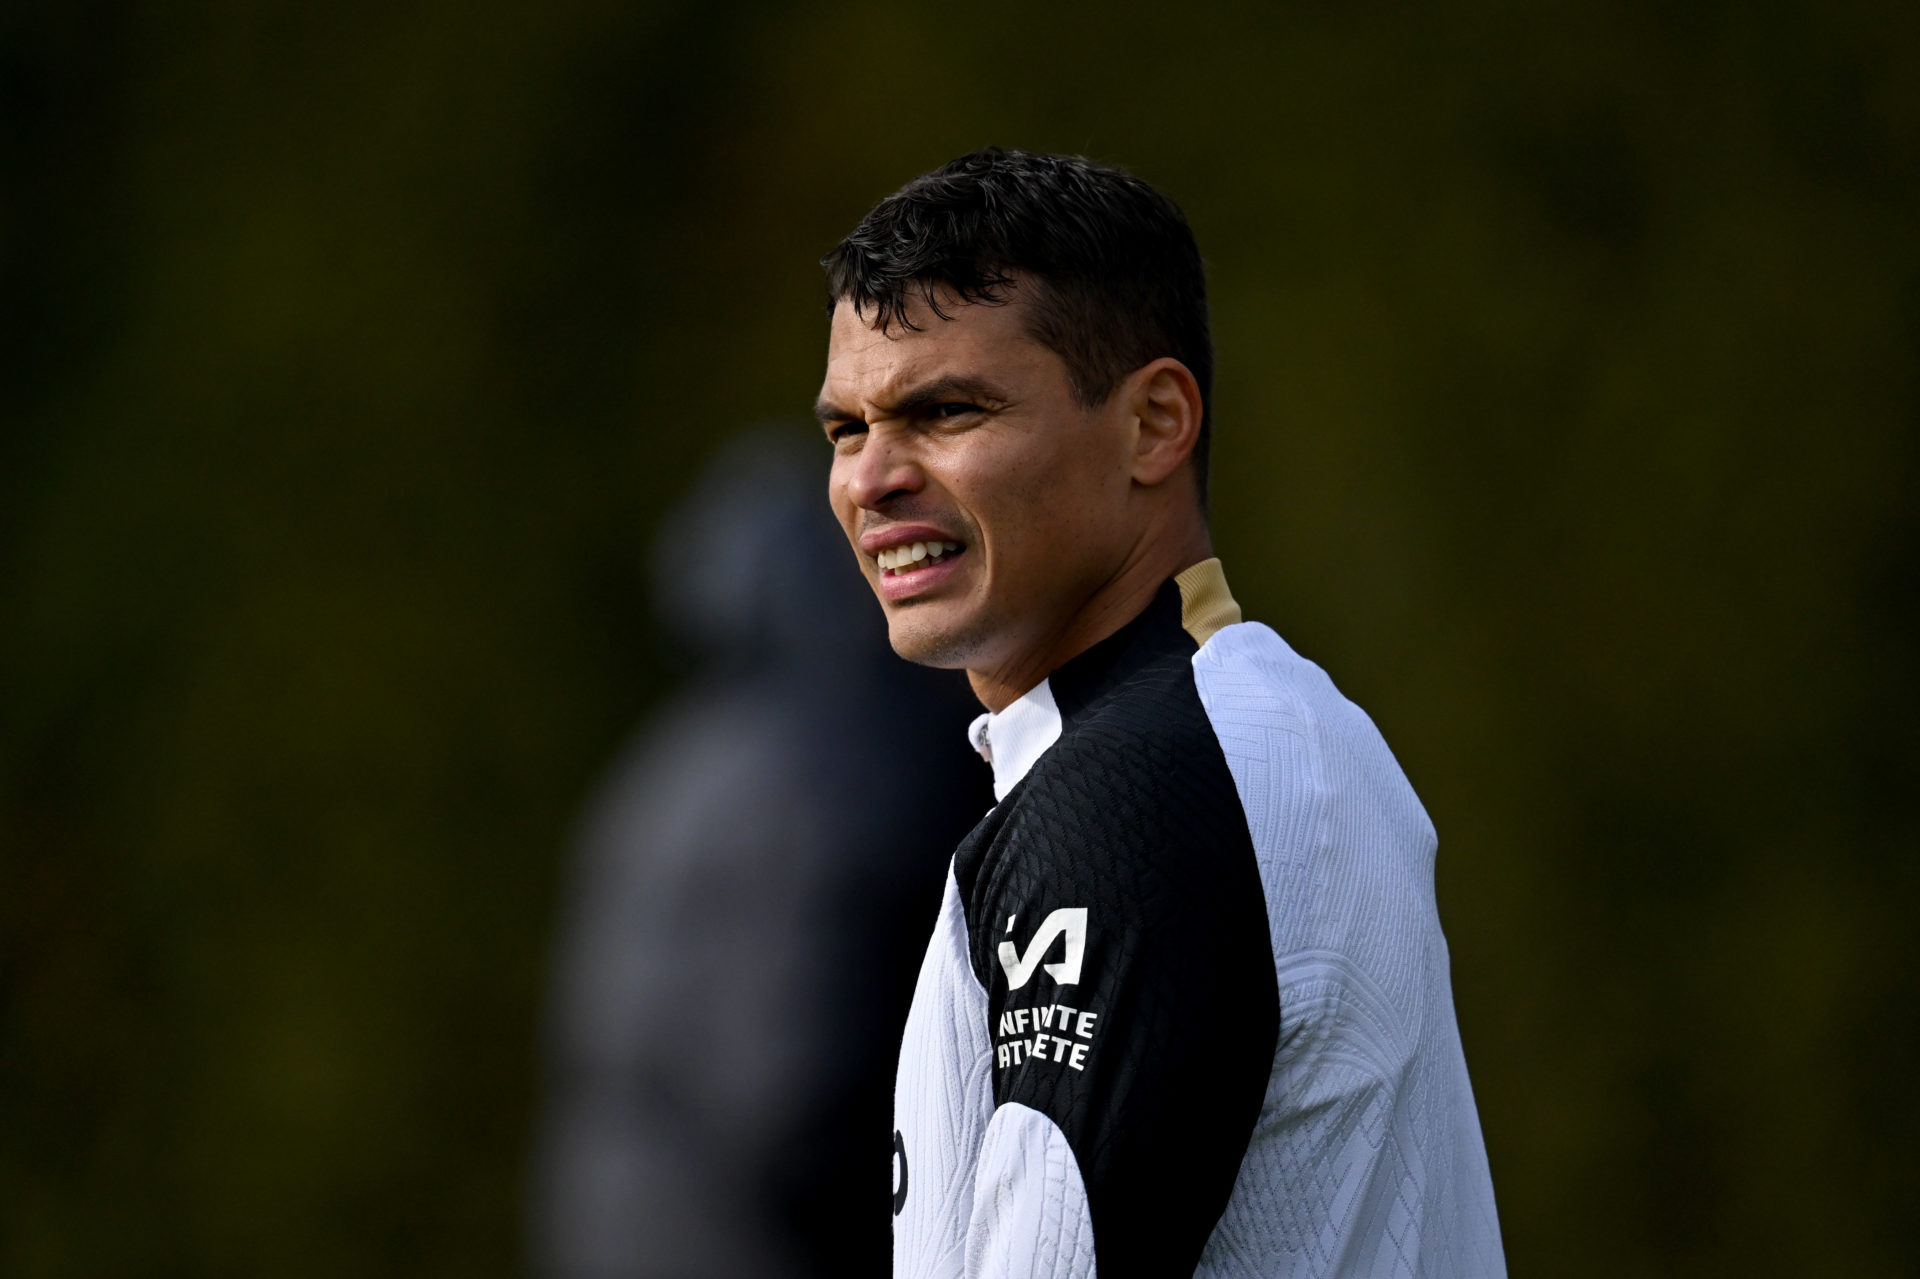 Thiago Silva names ‘world-class’ attacker who Chelsea turned down signing as one of his toughest opponents